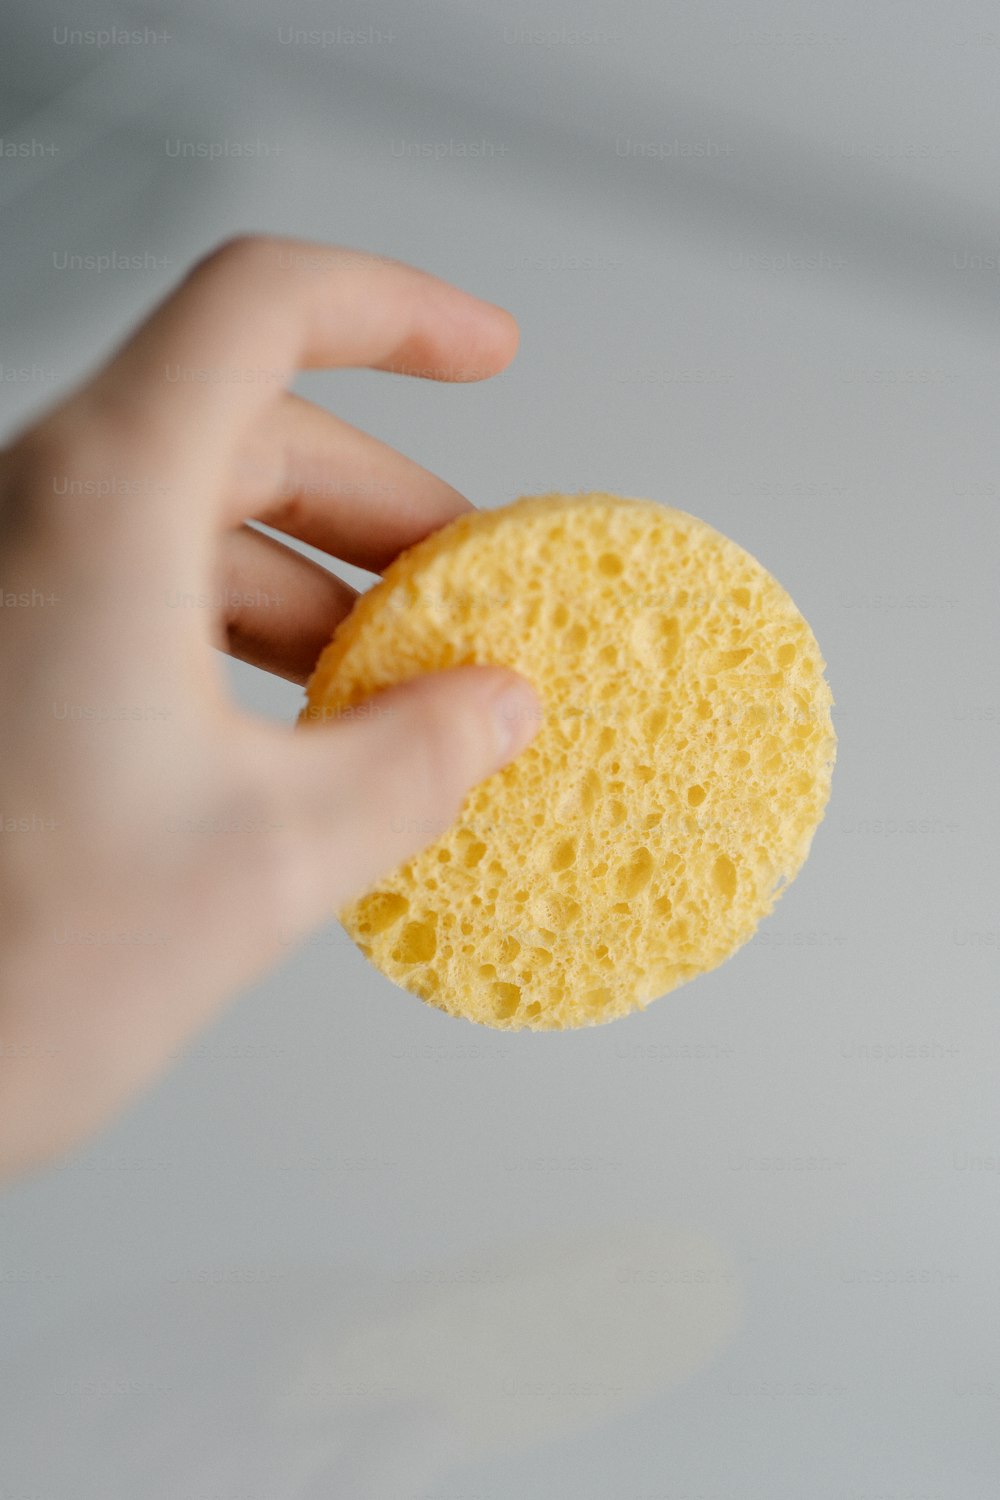 a hand holding a sponge over a white surface